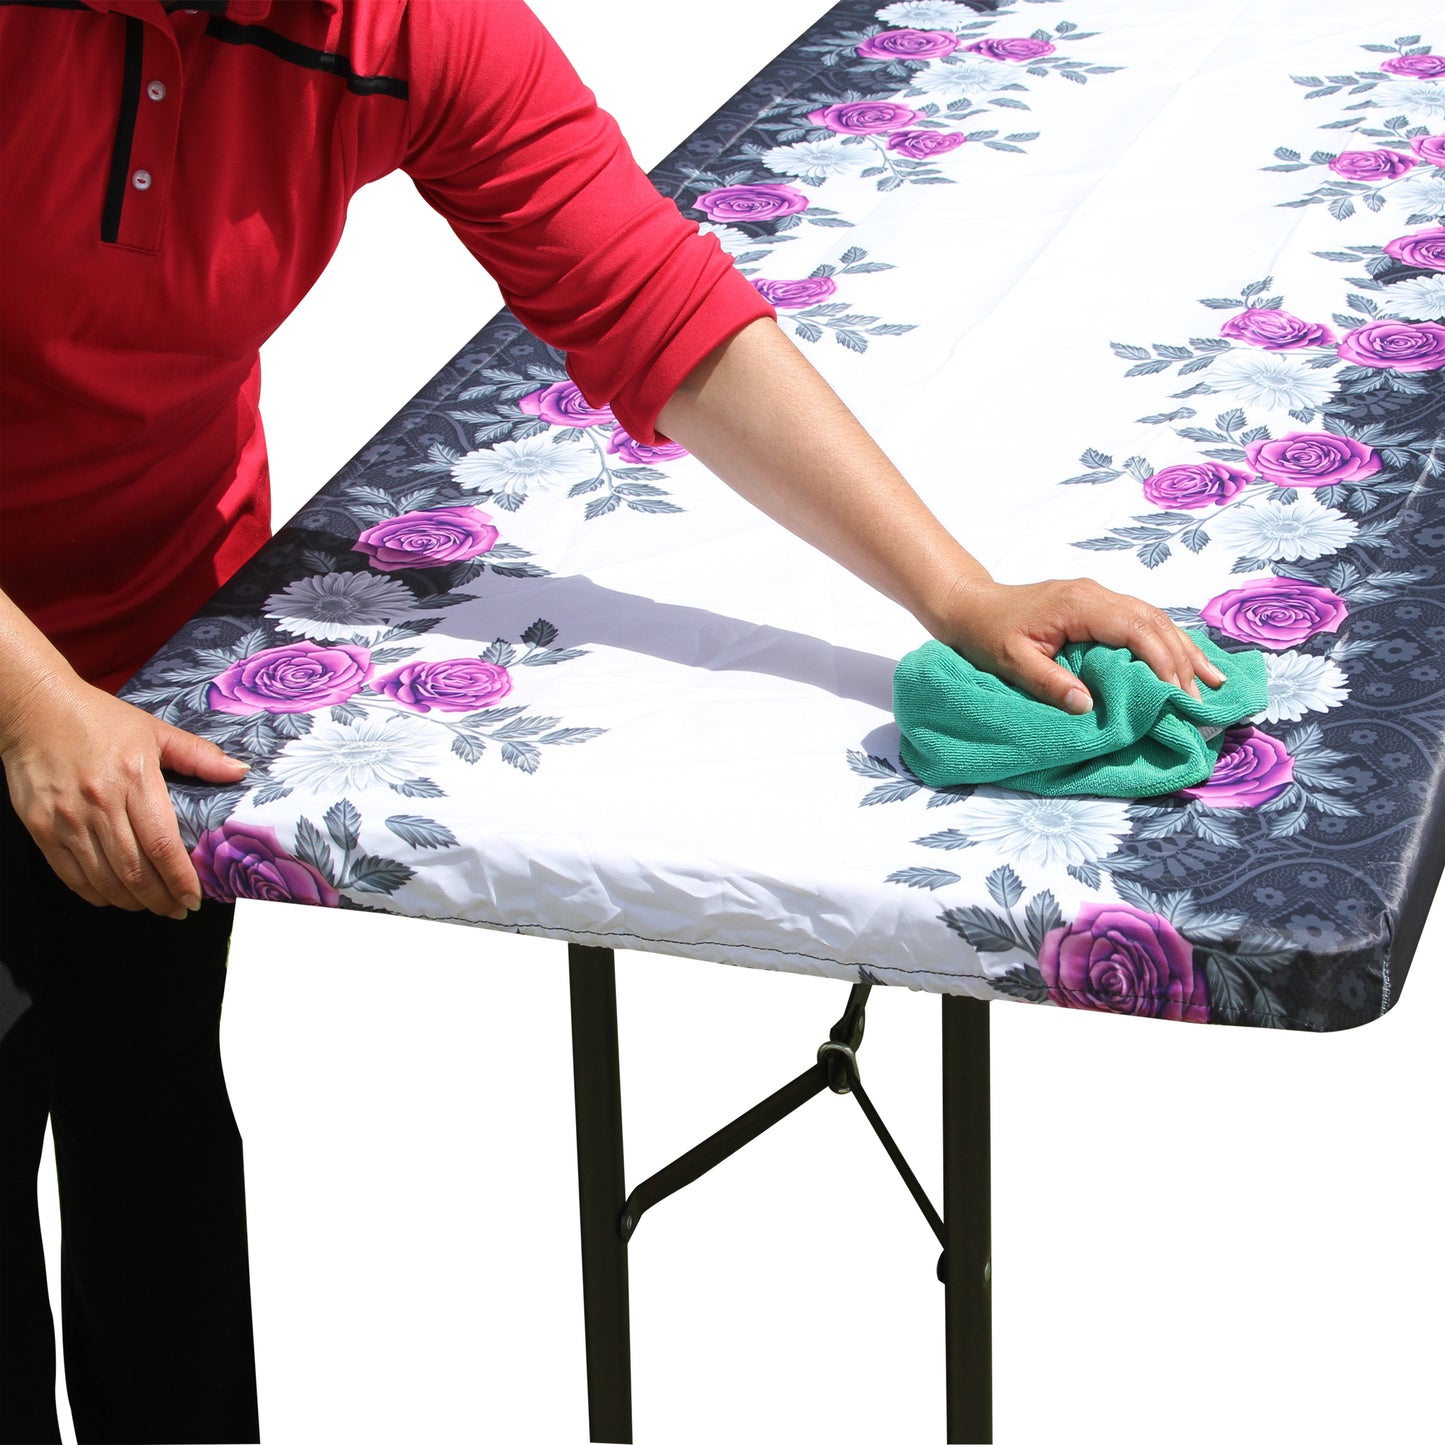 TableCloth PLUS 96" Roses Fitted Polyester Tablecloth for 8' Folding Tables wipe clean and are machine washable